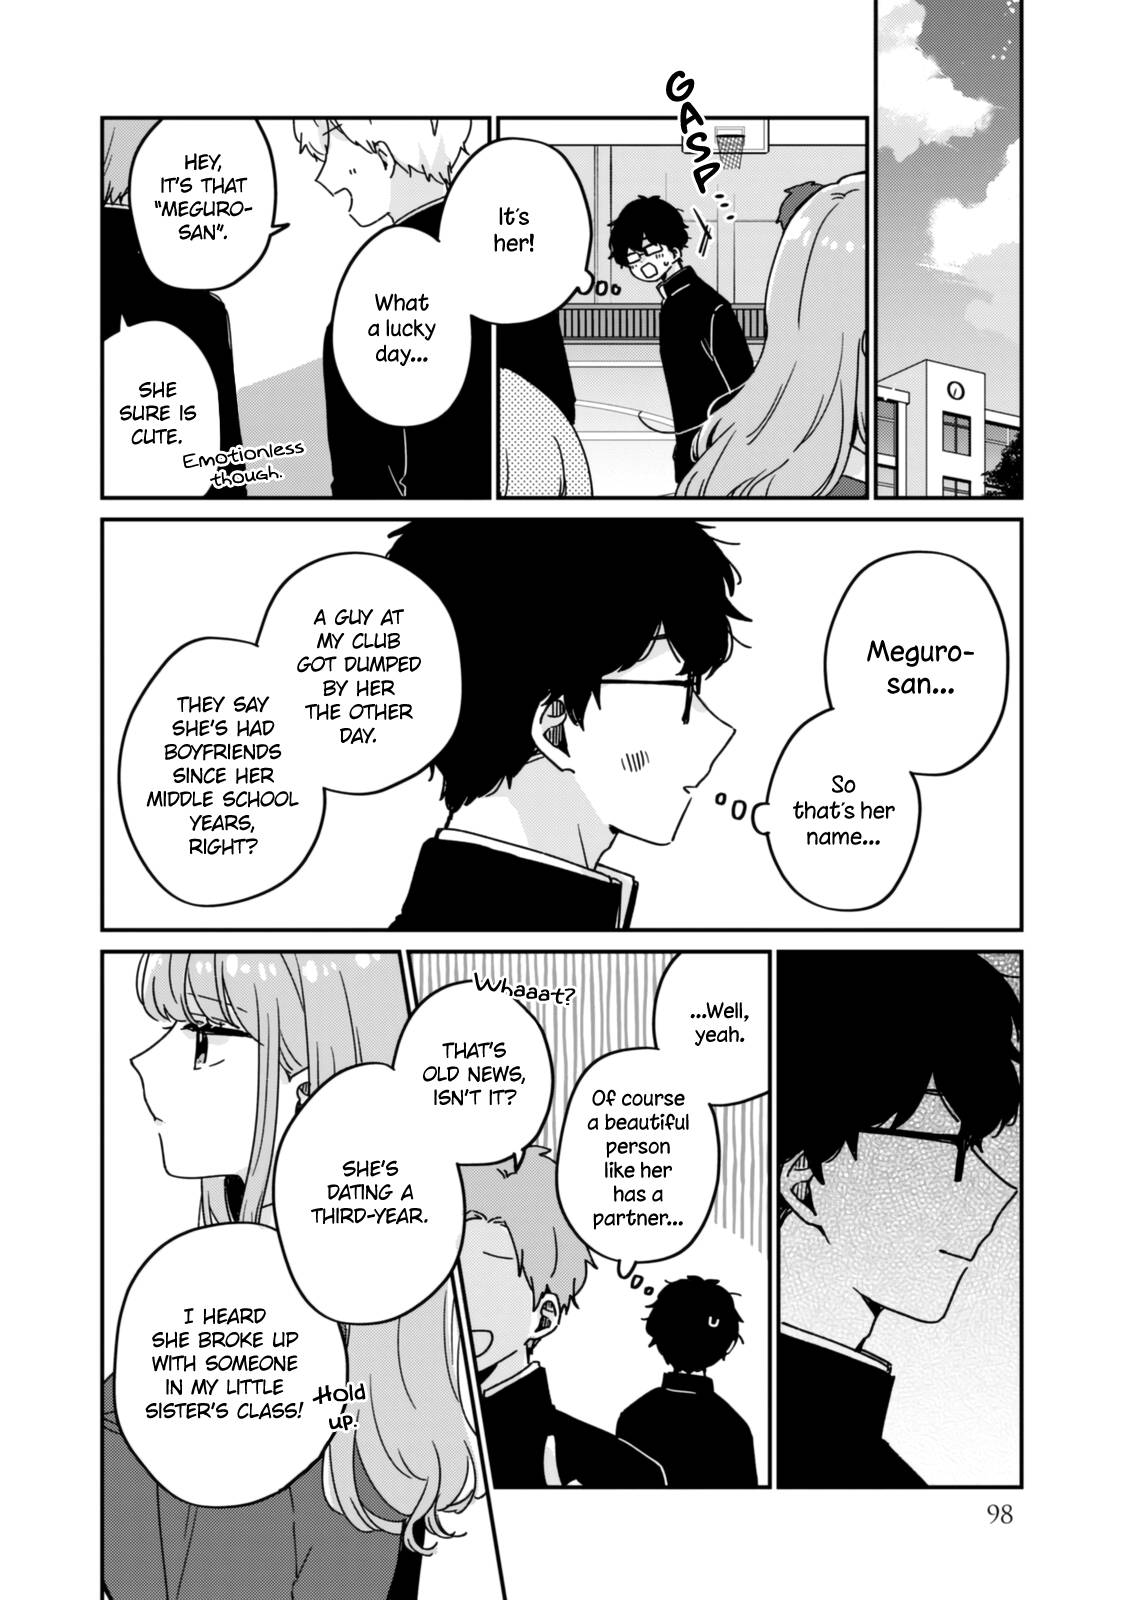 It's Not Meguro-san's First Time - chapter 51.5 - #3